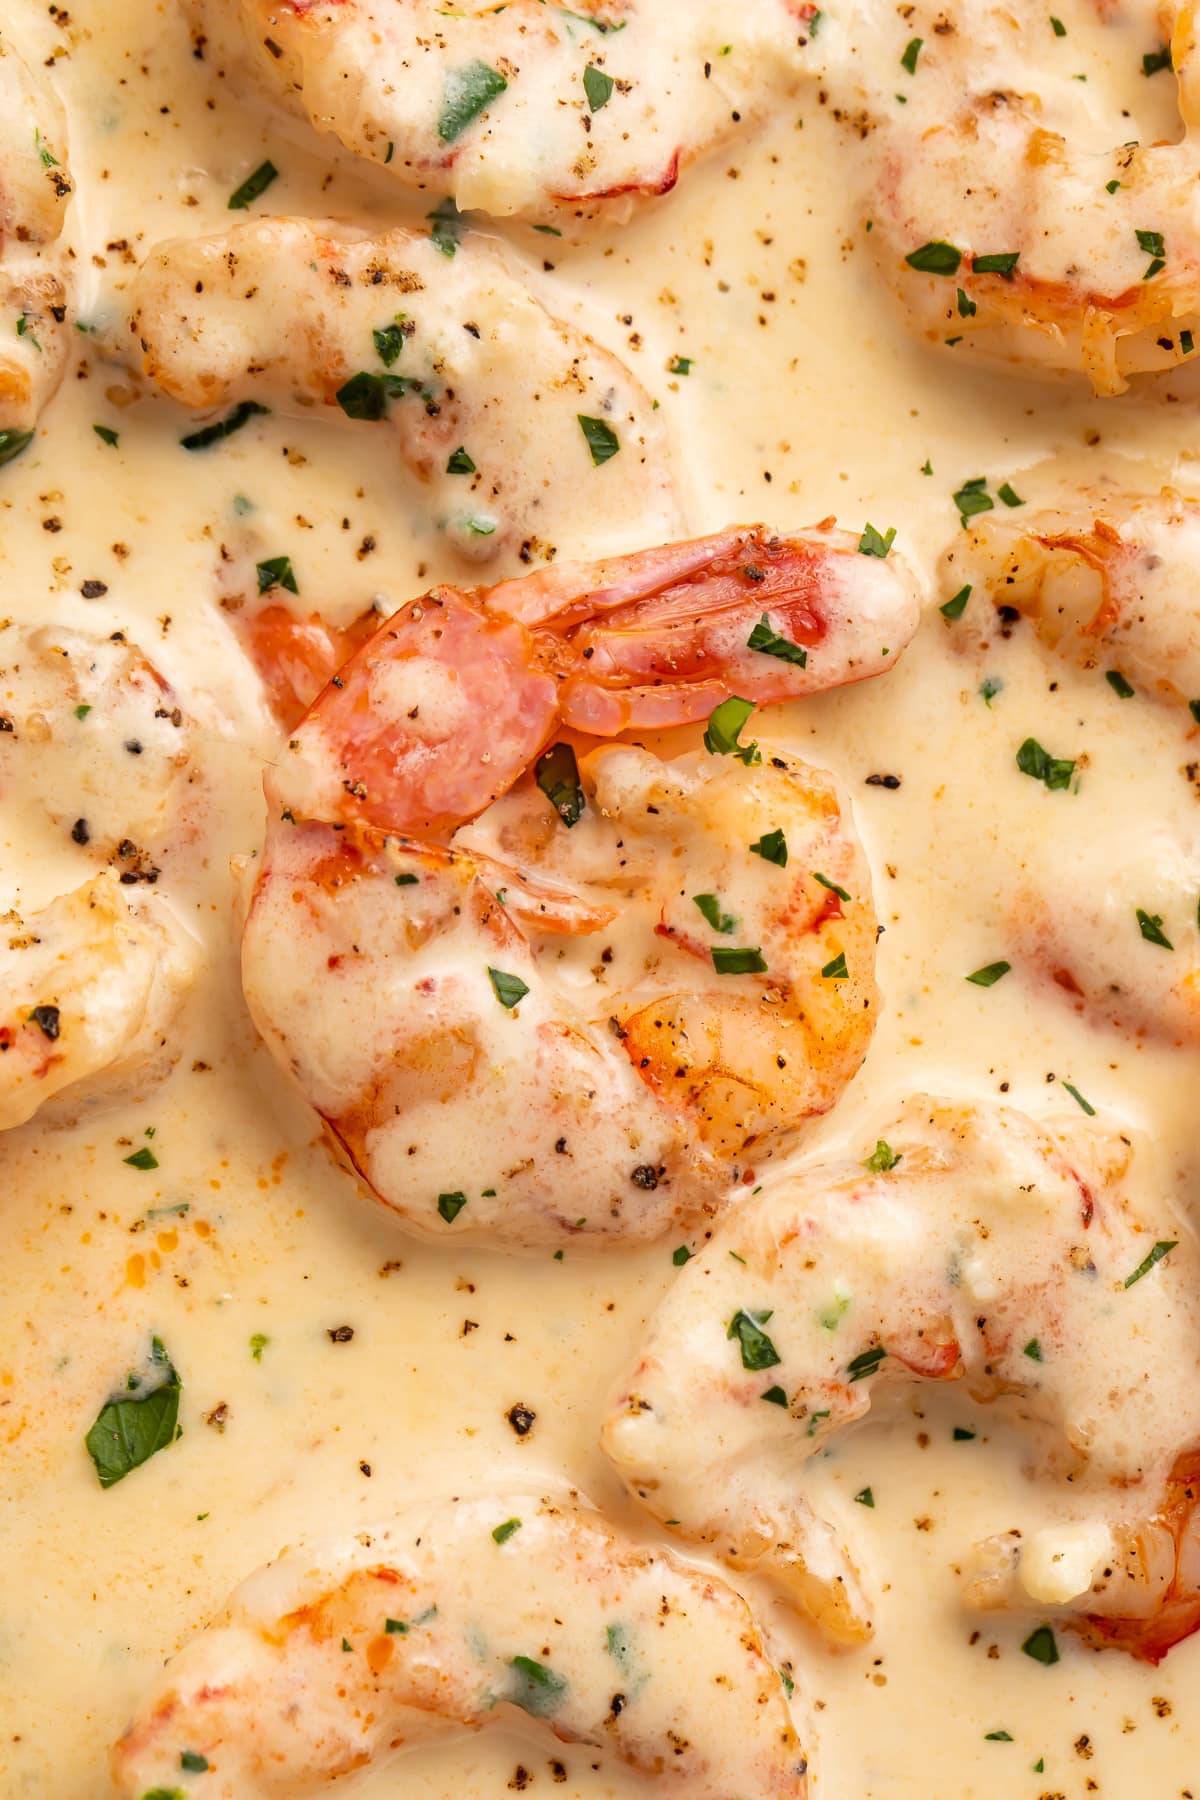 Close-up of a cooked, curled shrimp with a vibrant pink tail in a rich pale cream sauce dotted with herbs.